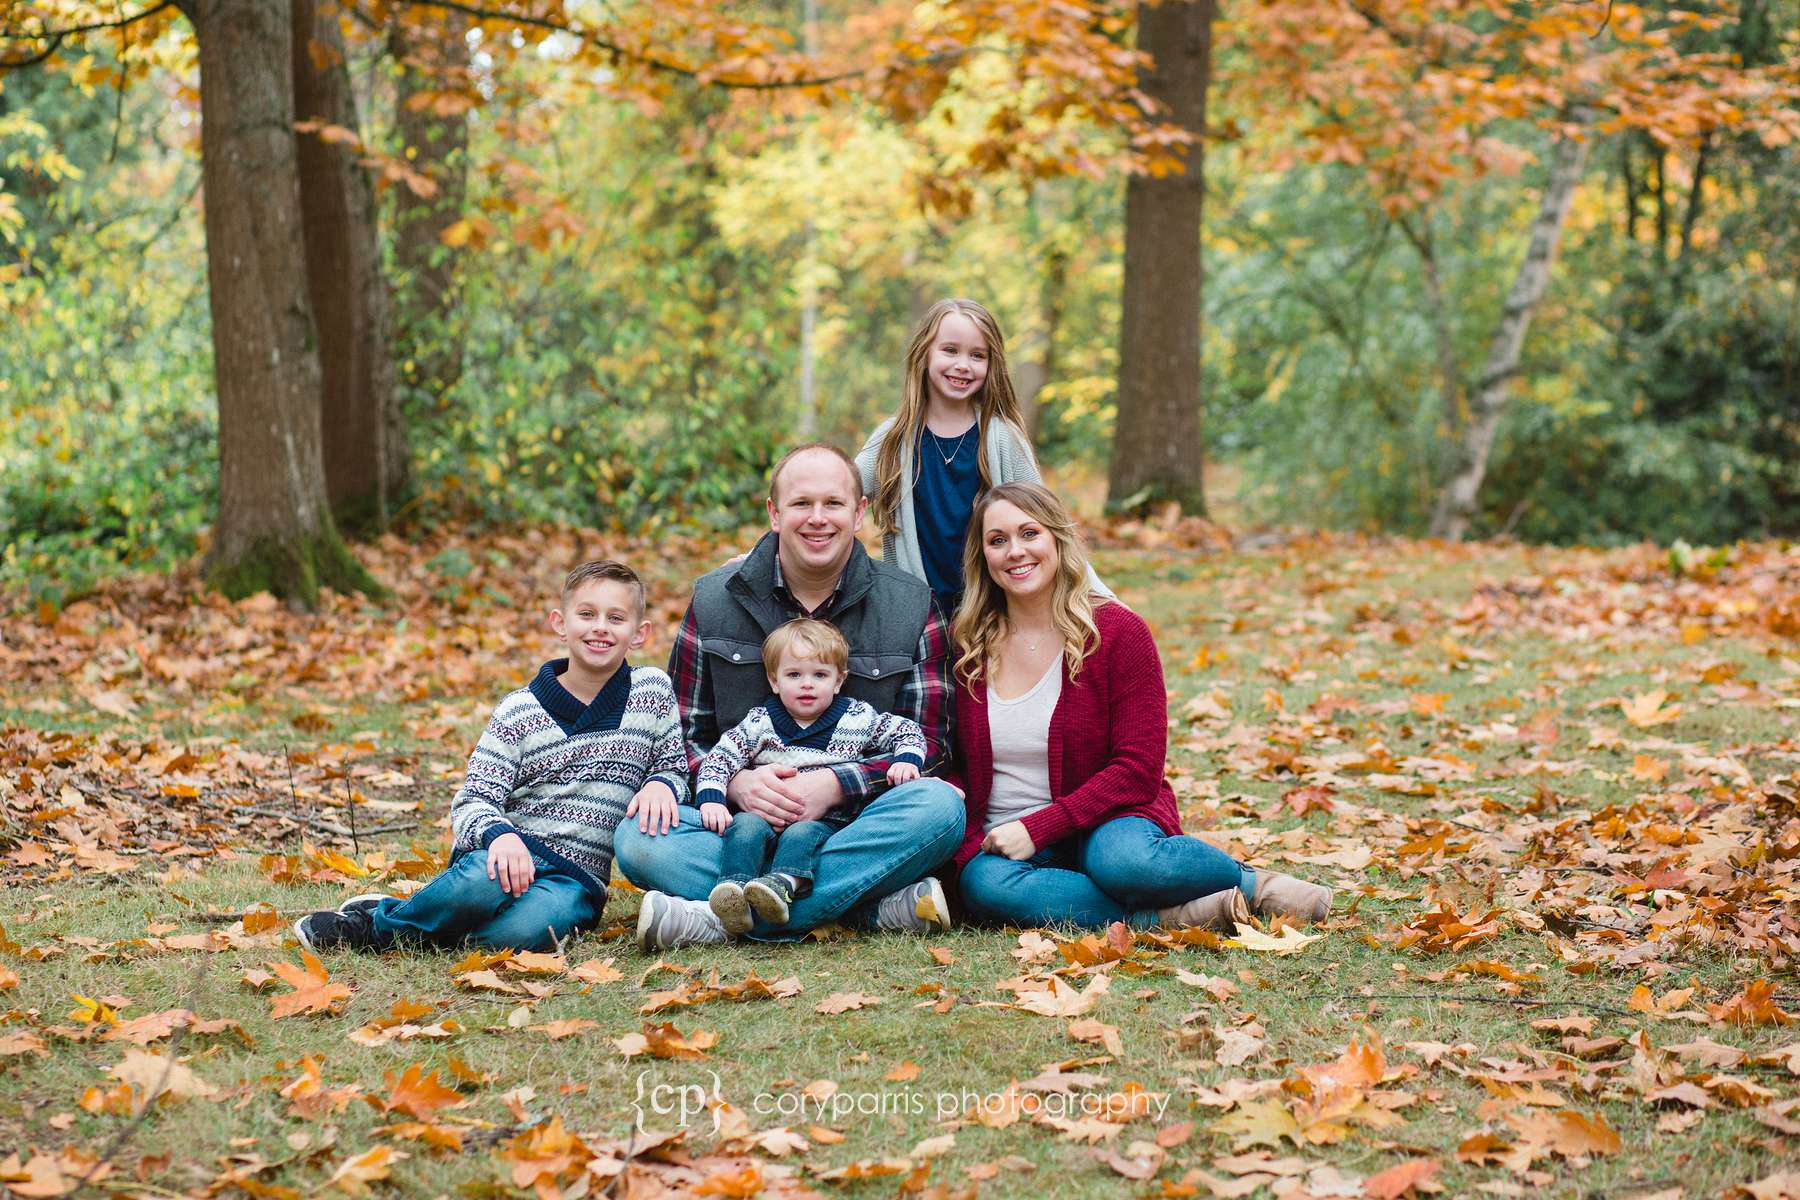 Seattle family portraits at Washington Park Arboretum in fall leaves